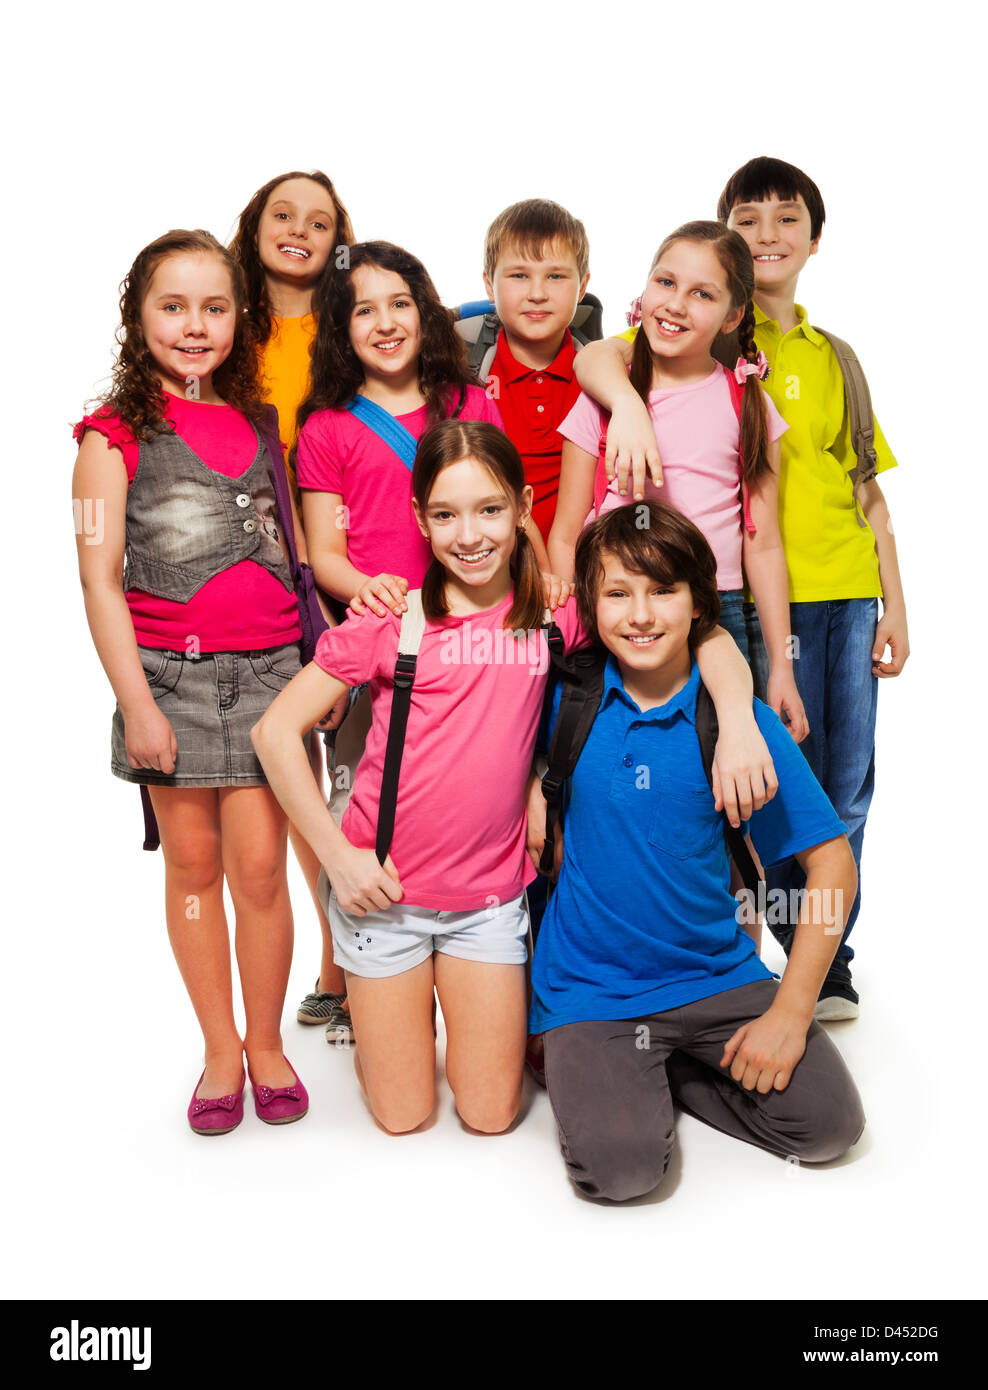 Group of 8 kids standing together with backpacks, smiling, laughing, on white Stock Photo